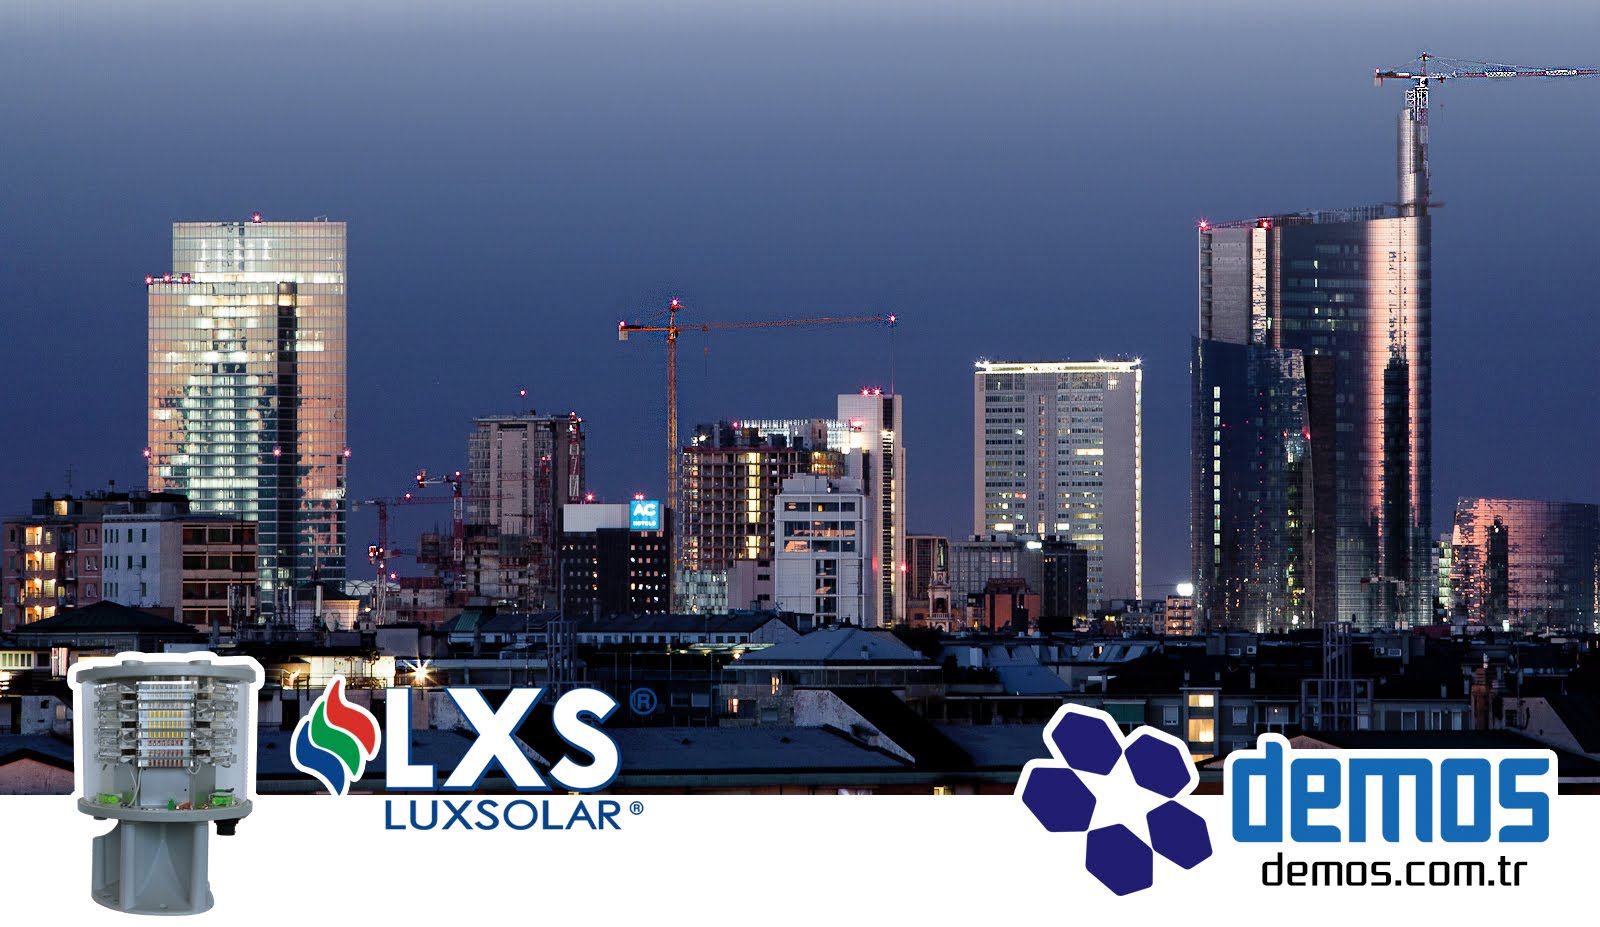 Wetra and Luxsolar brand